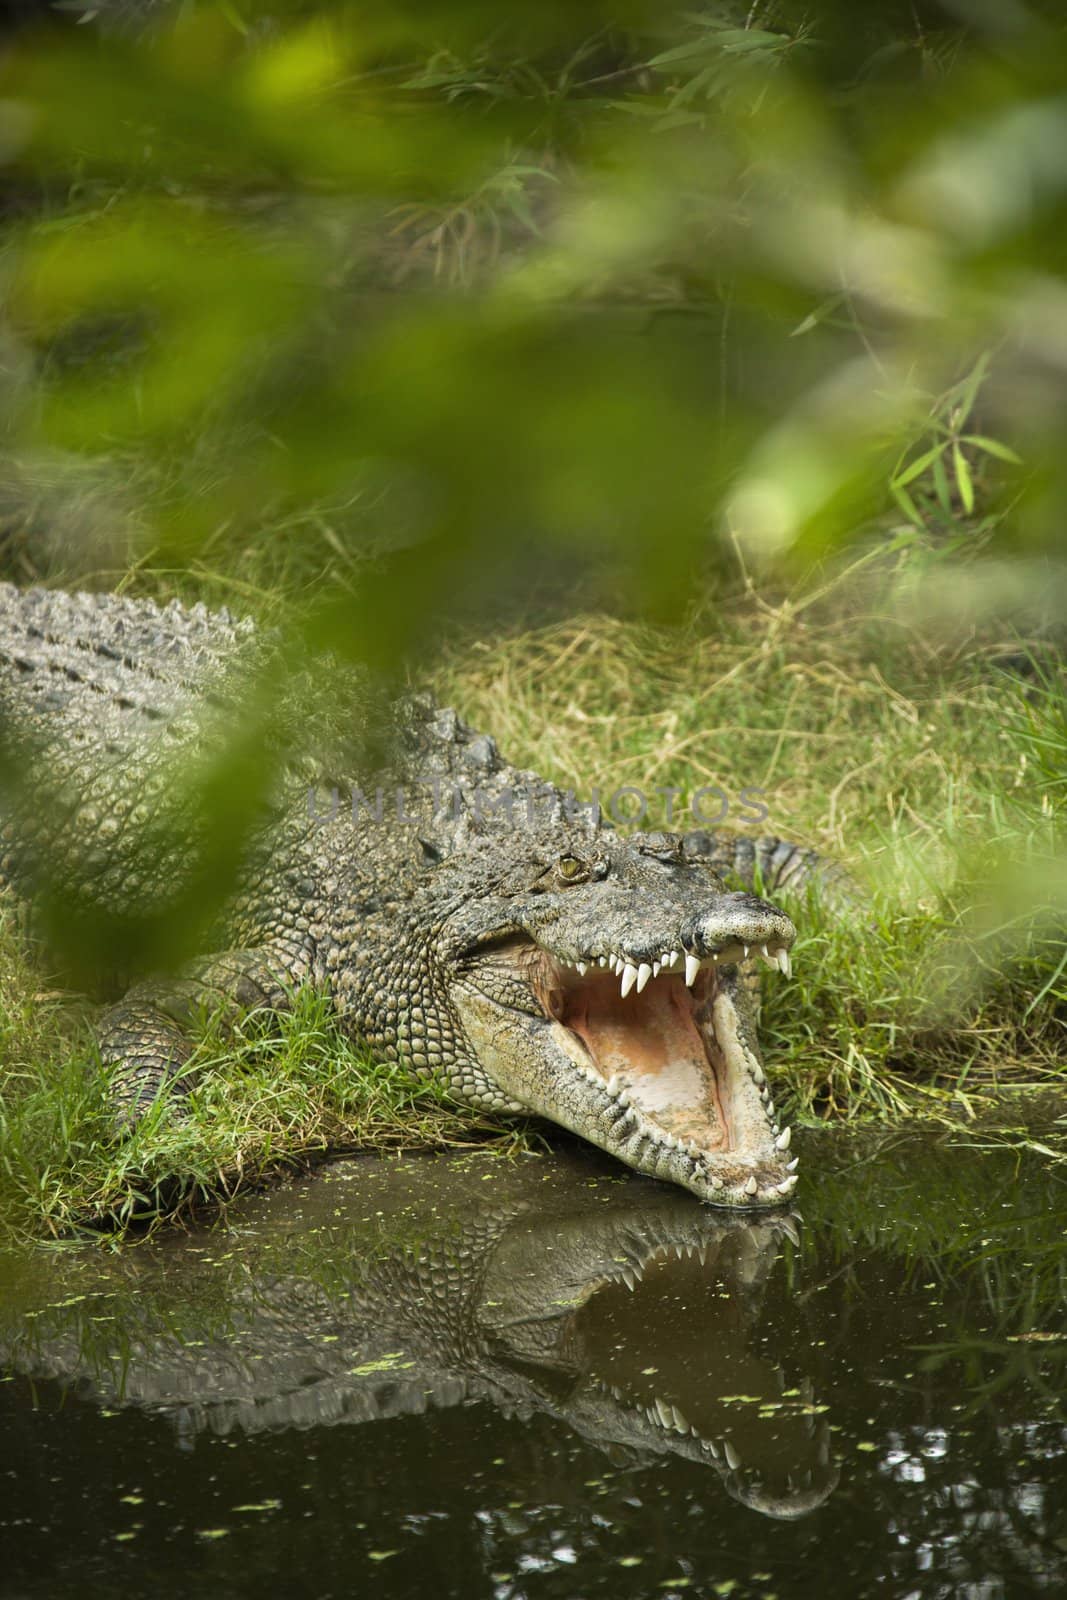 Crocodile with mouth wide open by water edge in Australia.